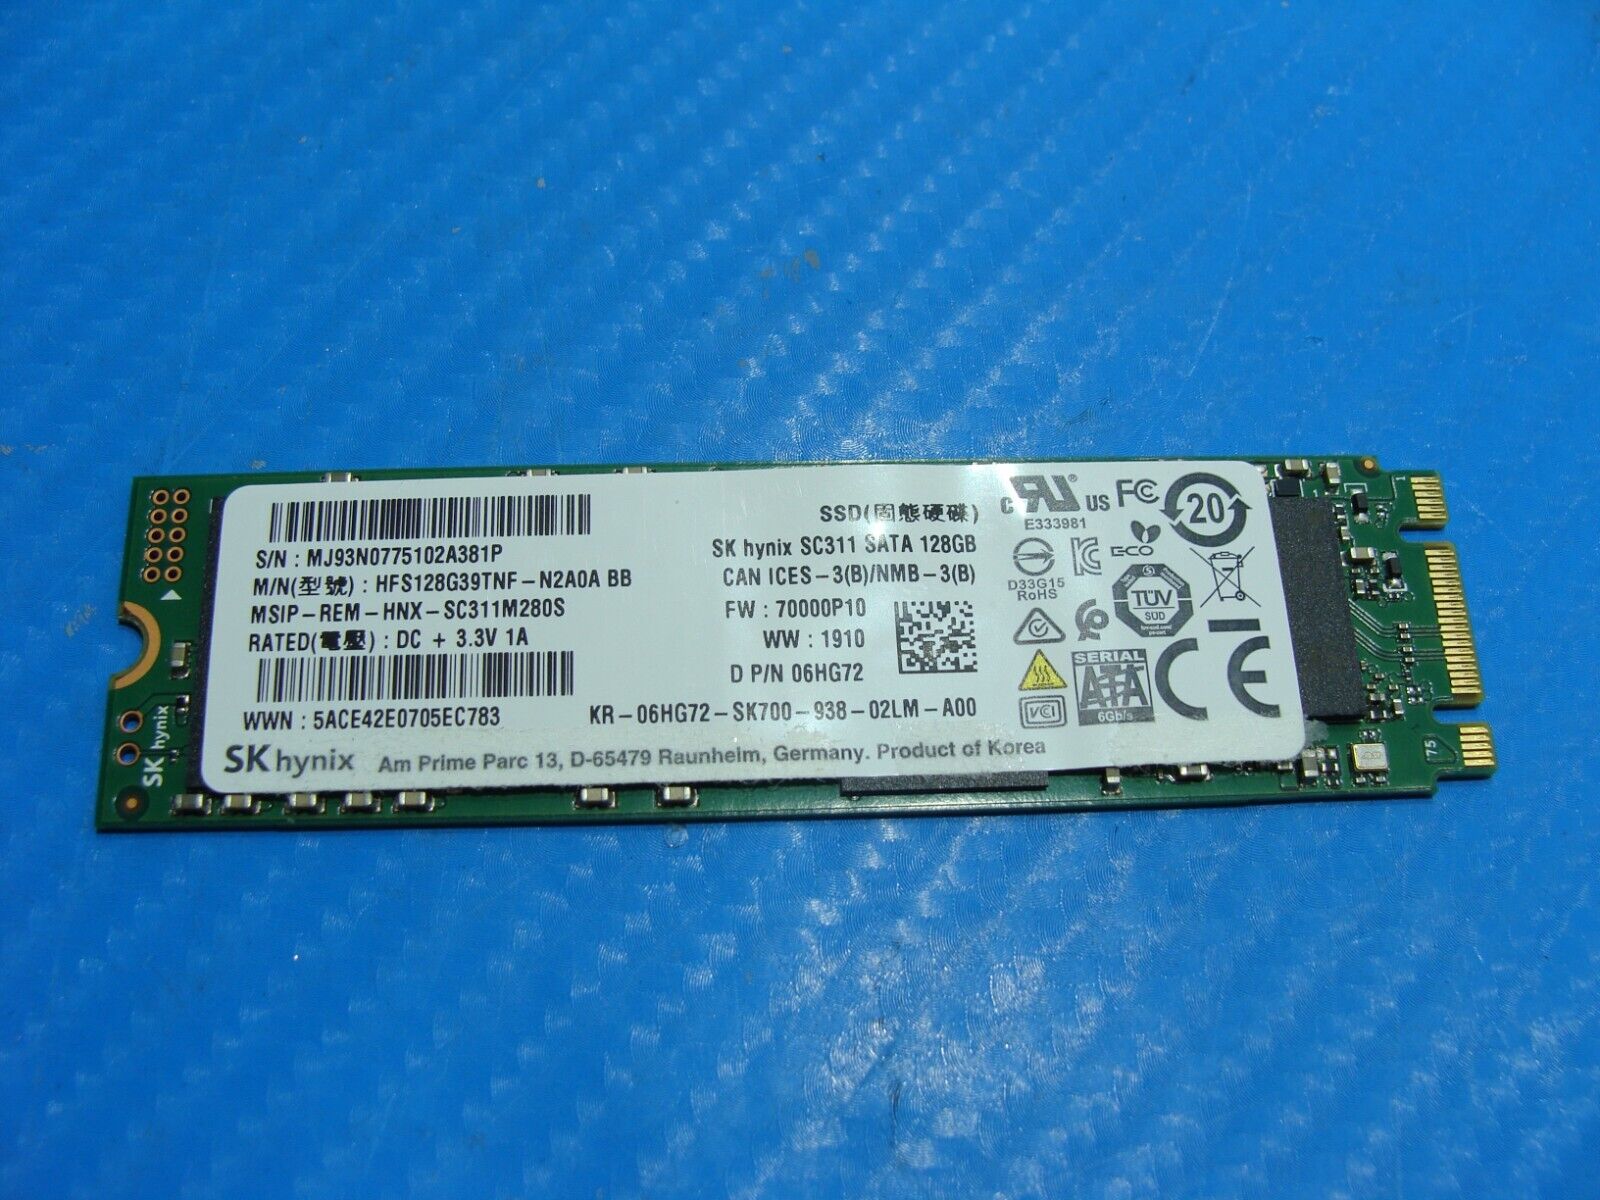 Dell 5491 SK Hynix 128GB SATA M.2 SSD Solid State Drive 6HG72 HFS128G39TNF-N2A0A